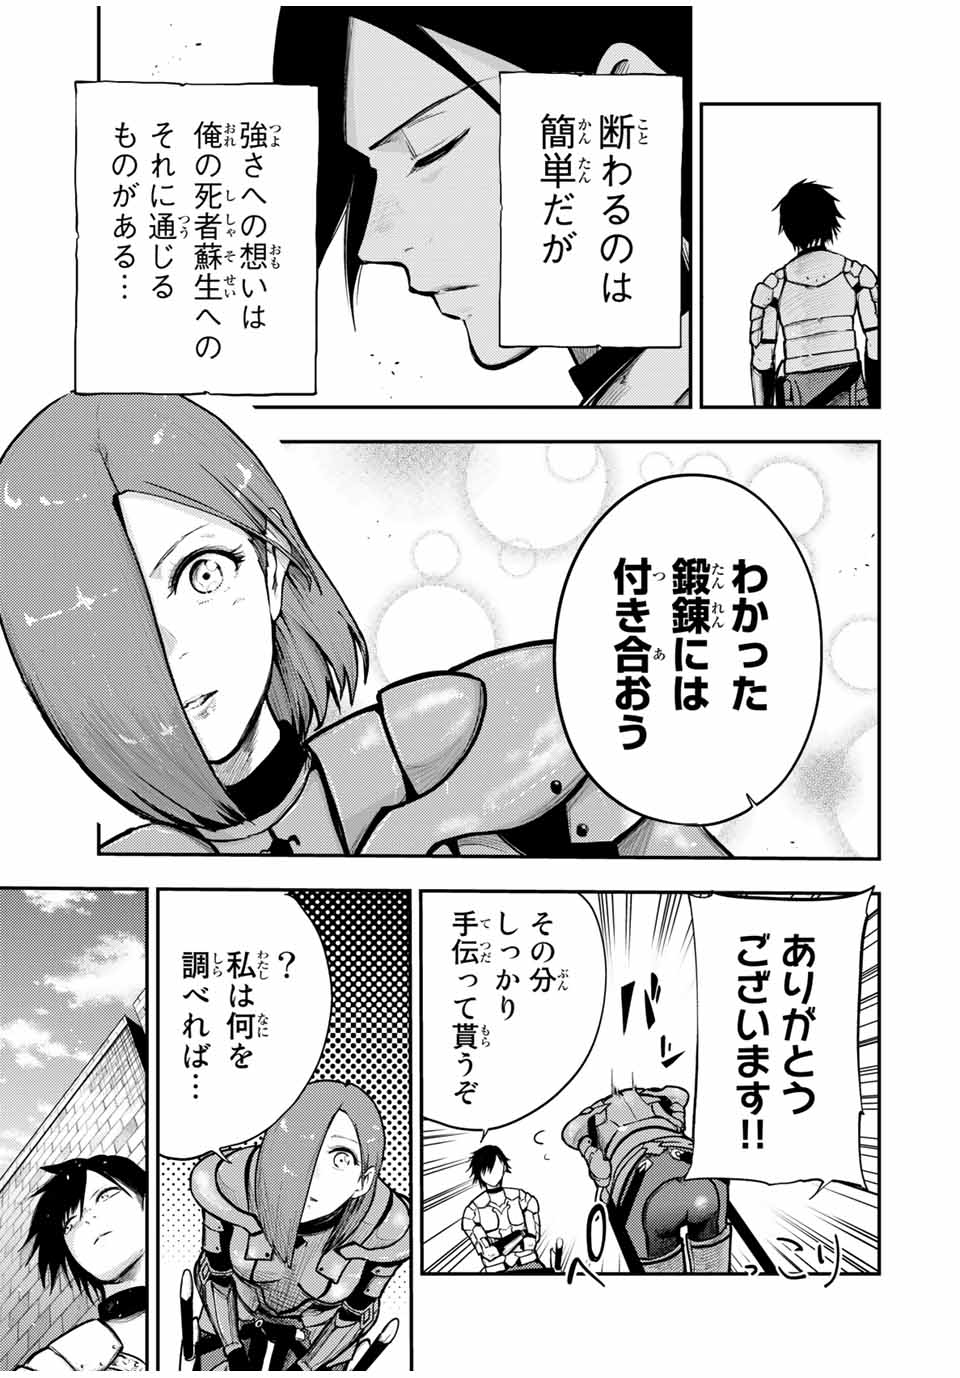 the strongest former prince-; 奴隷転生 ～その奴隷、最強の元王子につき～ 第32話 - Page 19